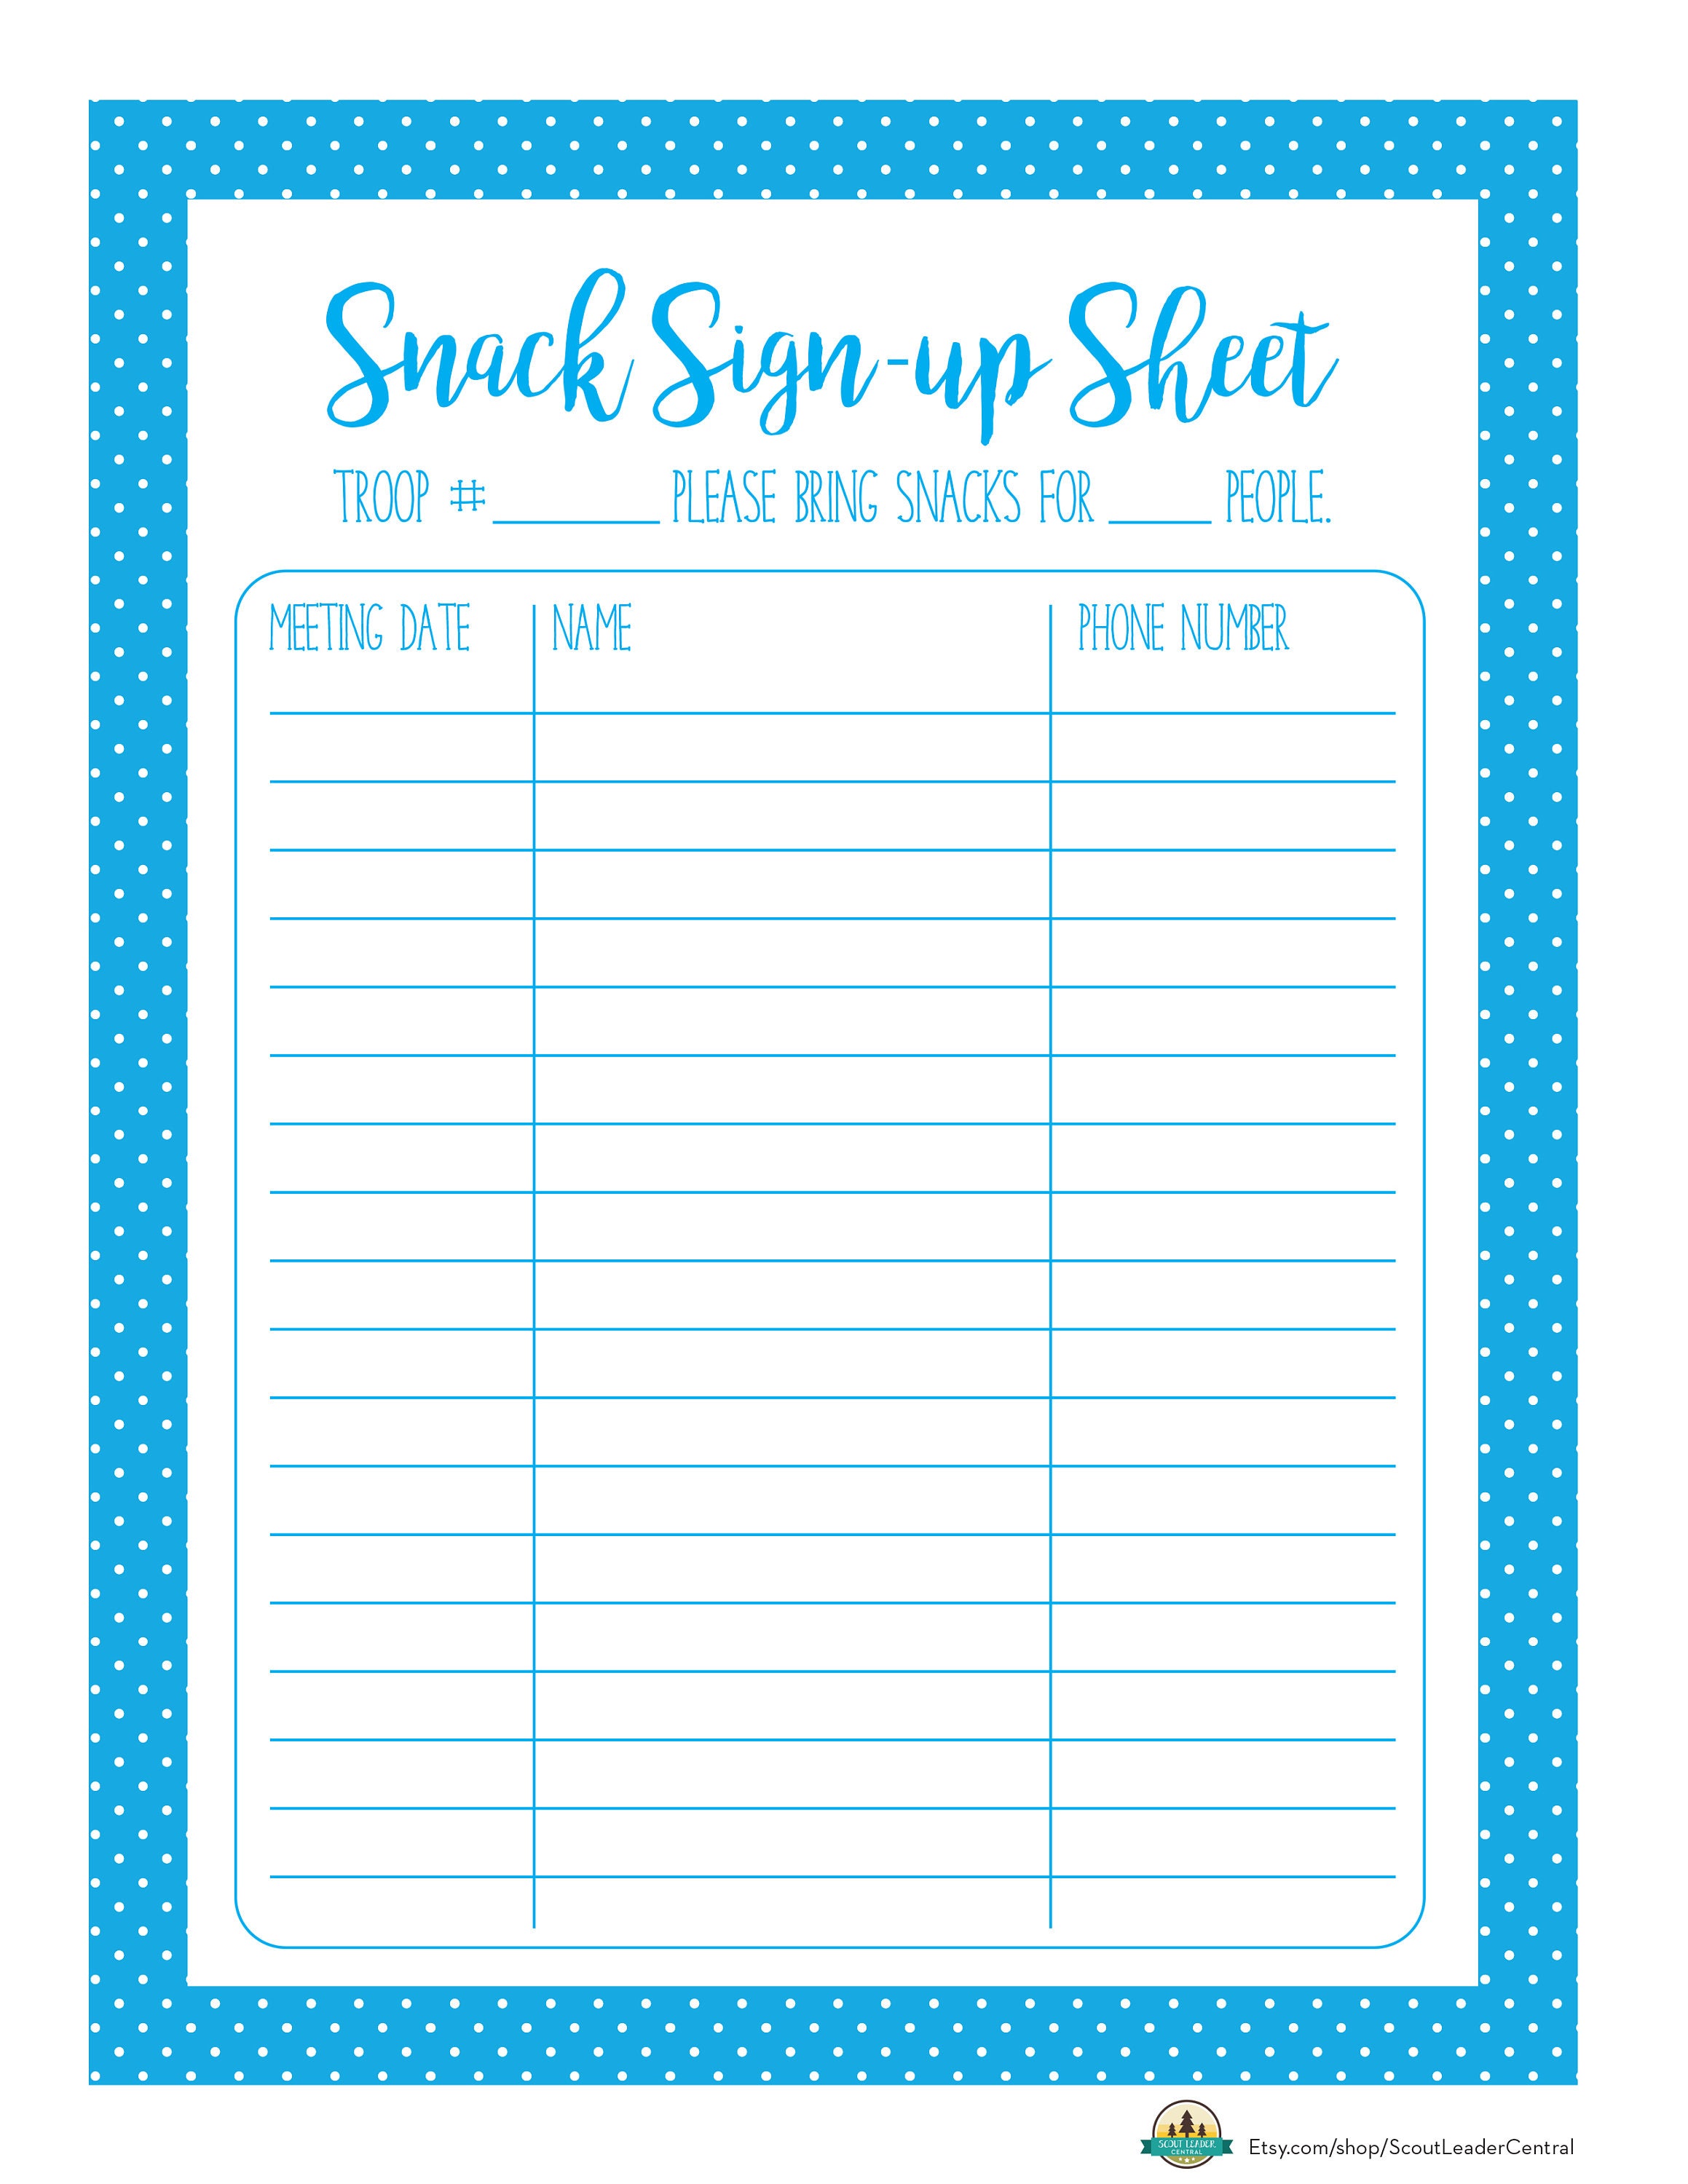 instant-download-snack-sign-up-sheet-in-bright-blue-etsy